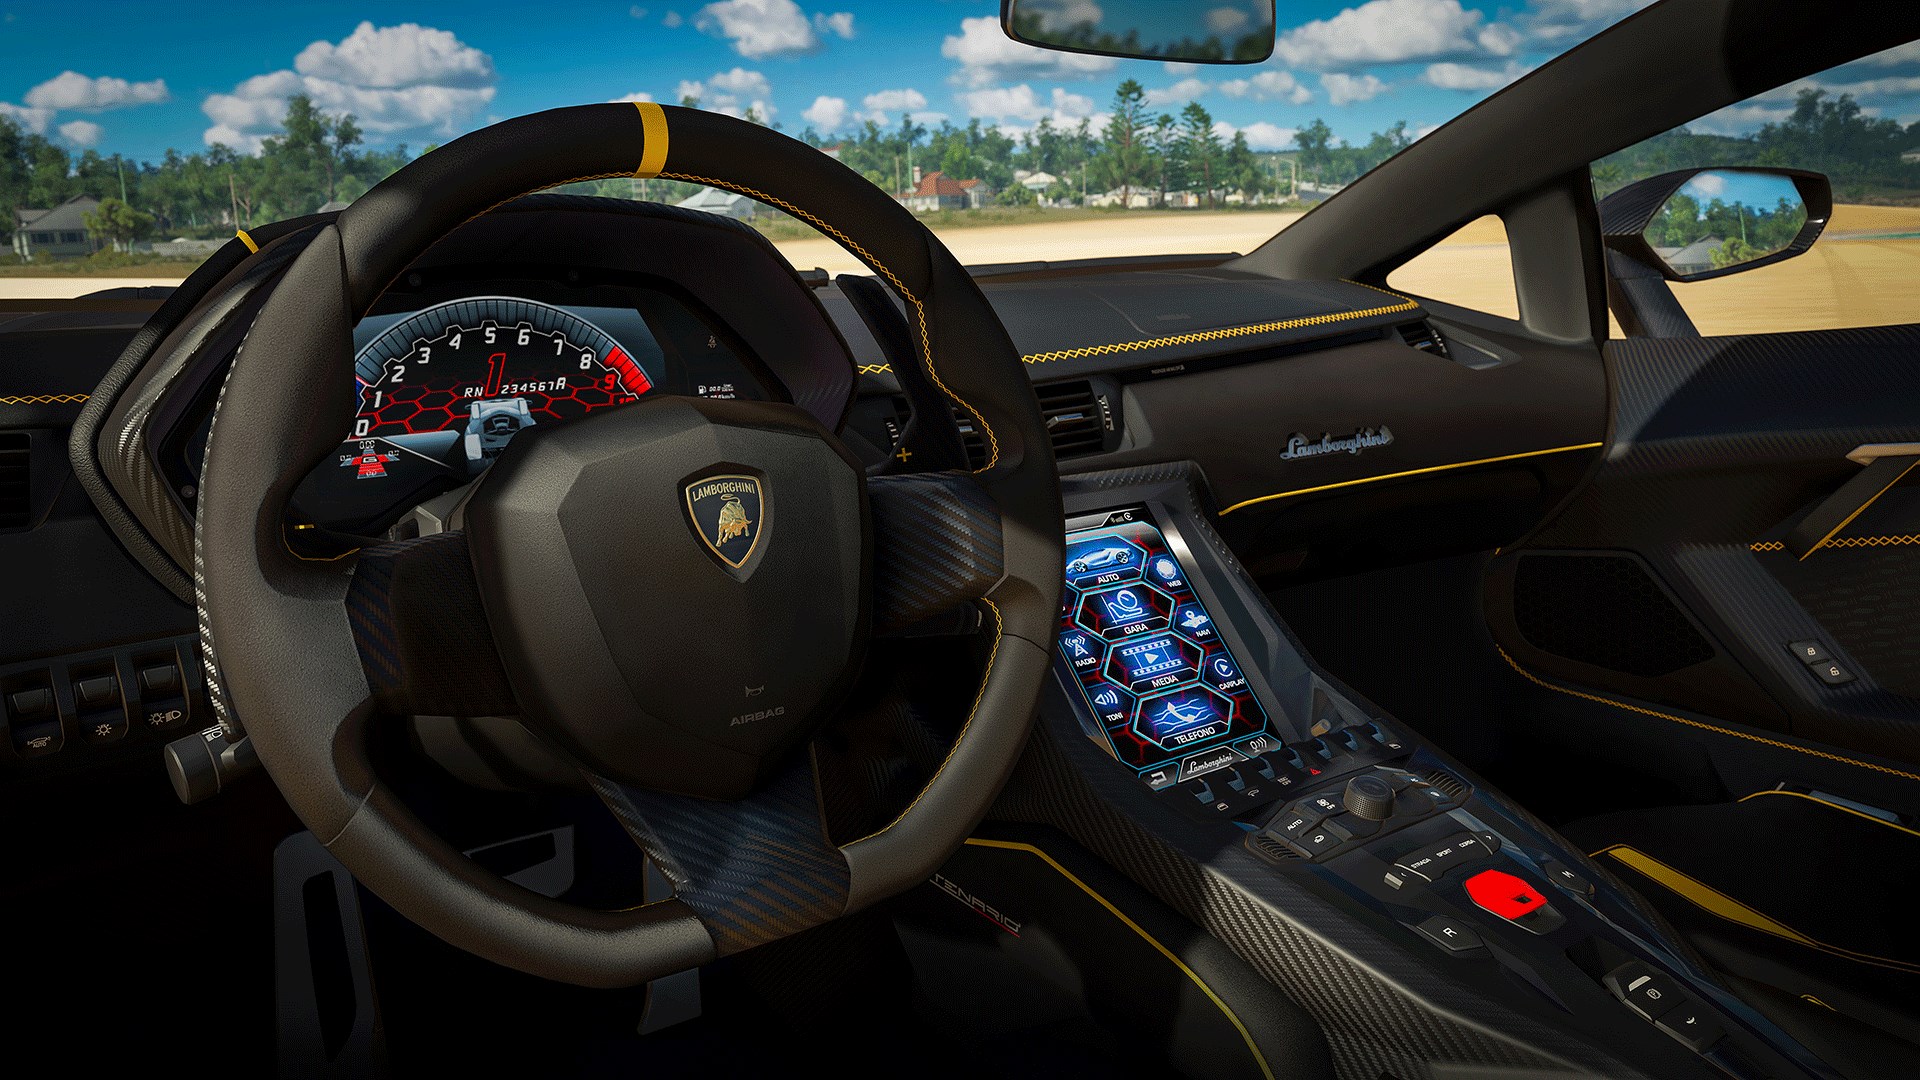 Download the Forza Horizon 3 demo from the Windows Store